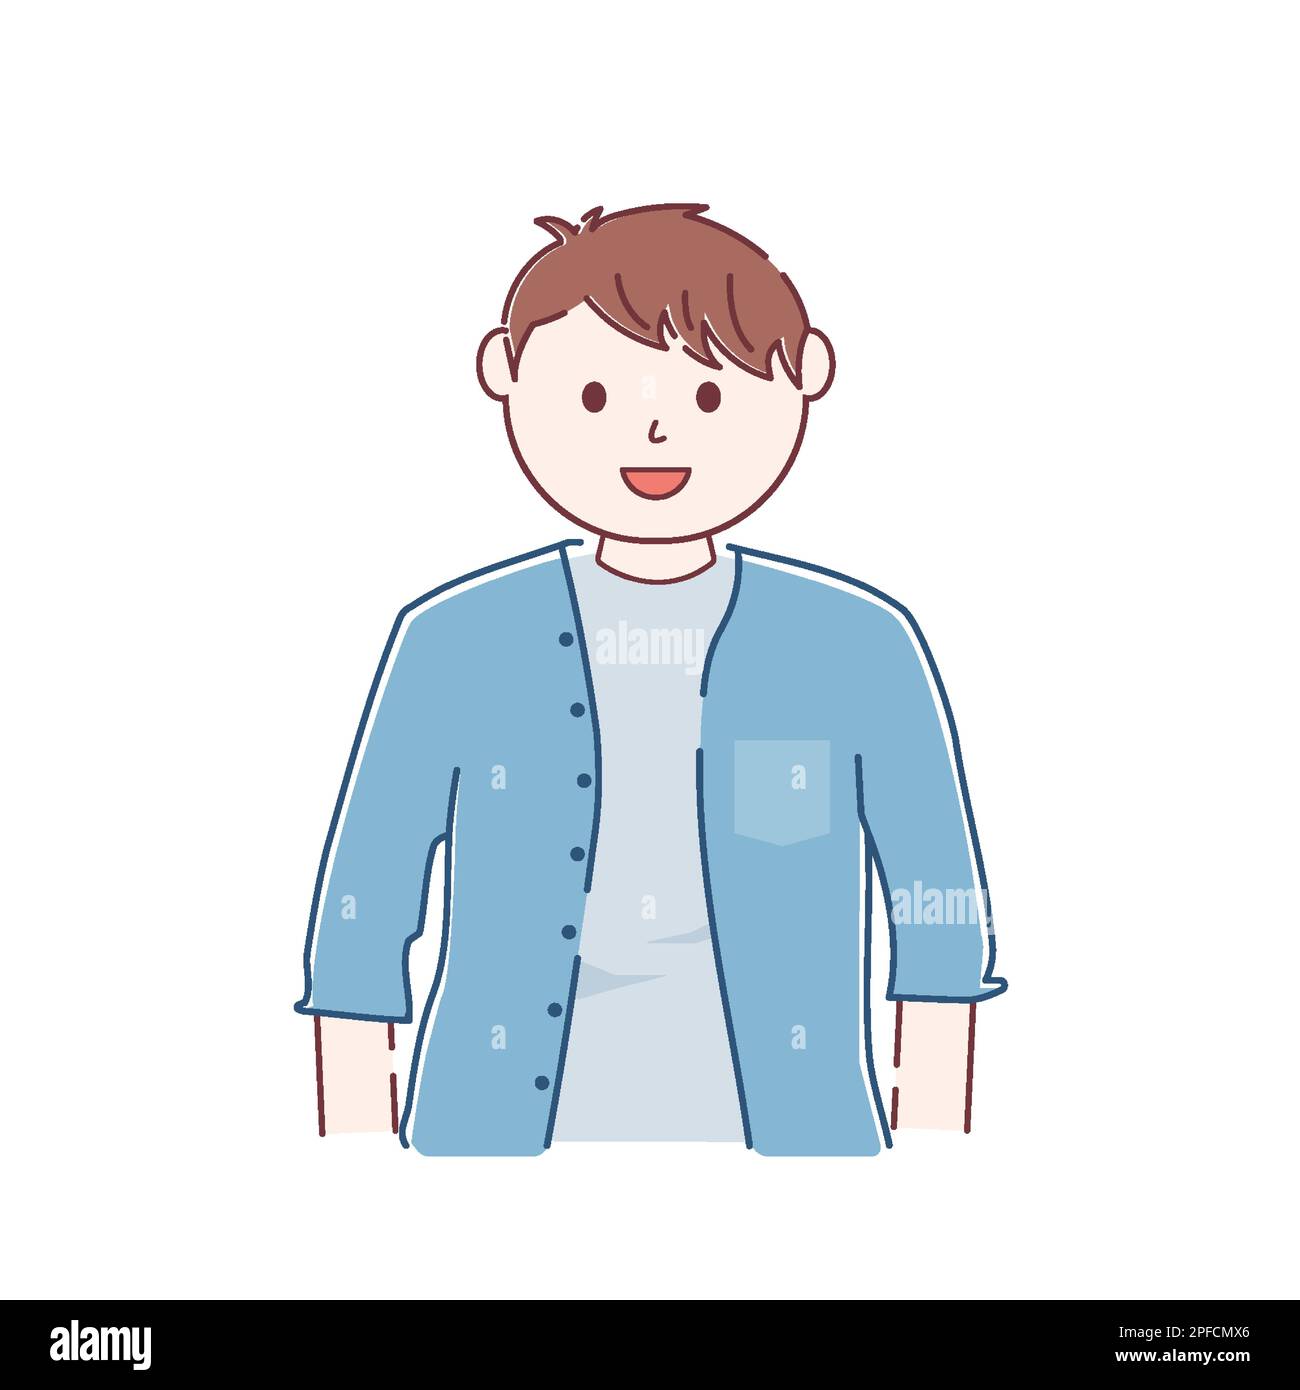 Boy is laughing out loud. flat design style vector illustration. Stock Vector